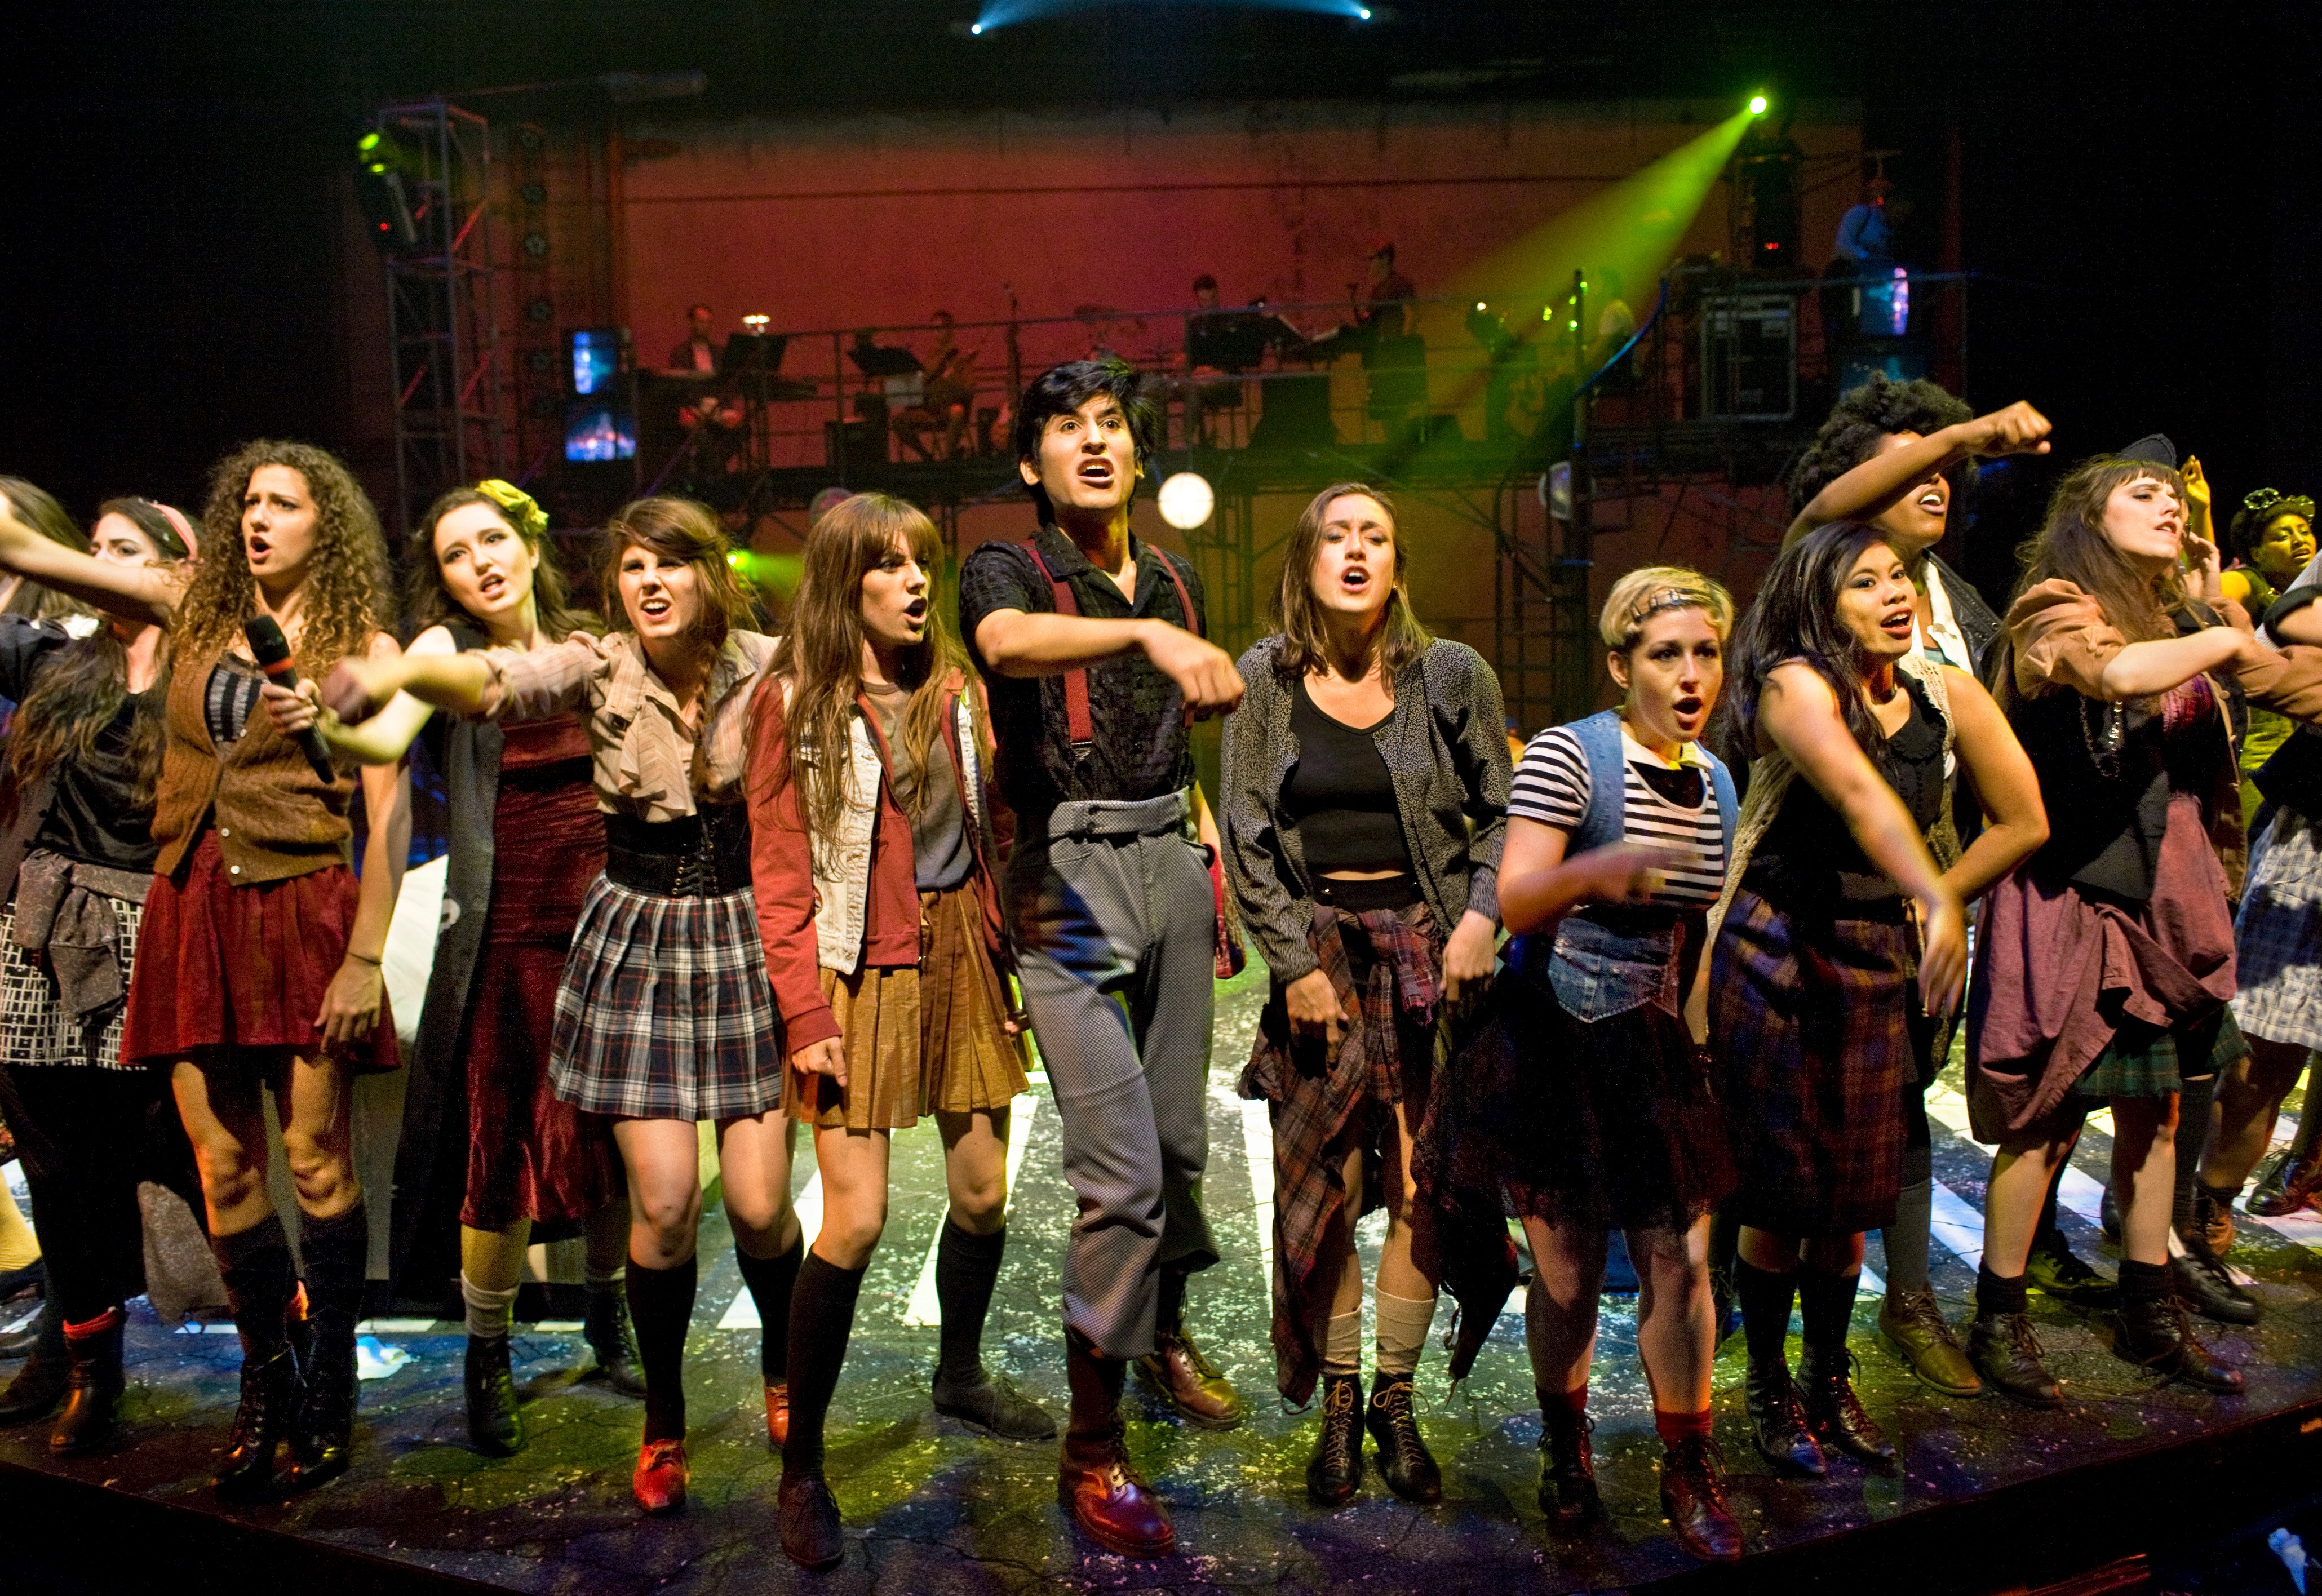 Rent The Musical